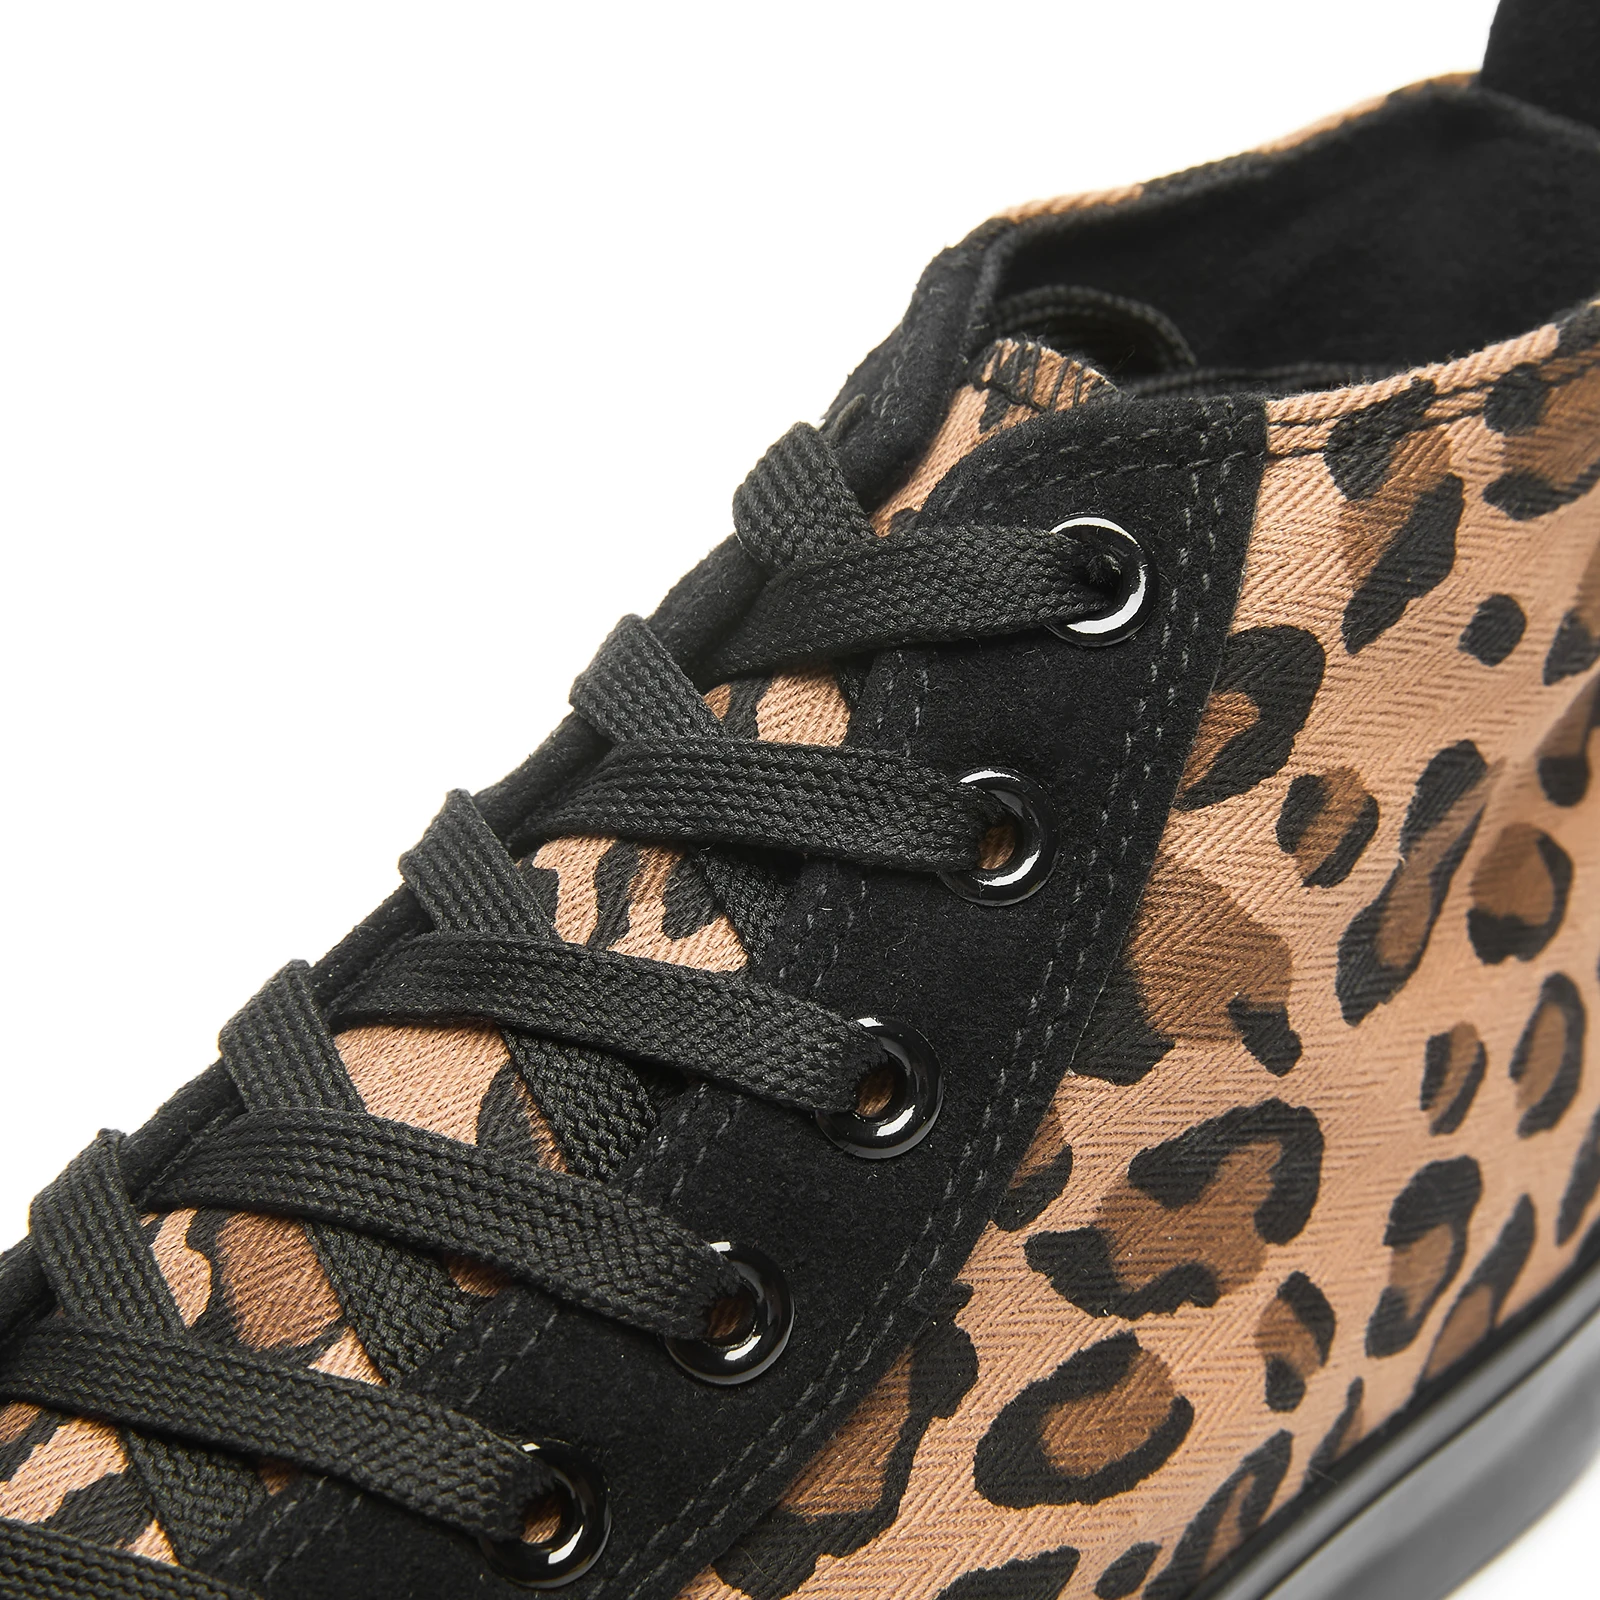 NR factory wholesale leopard print canvas shoes custom casual shoes high tops for men and women